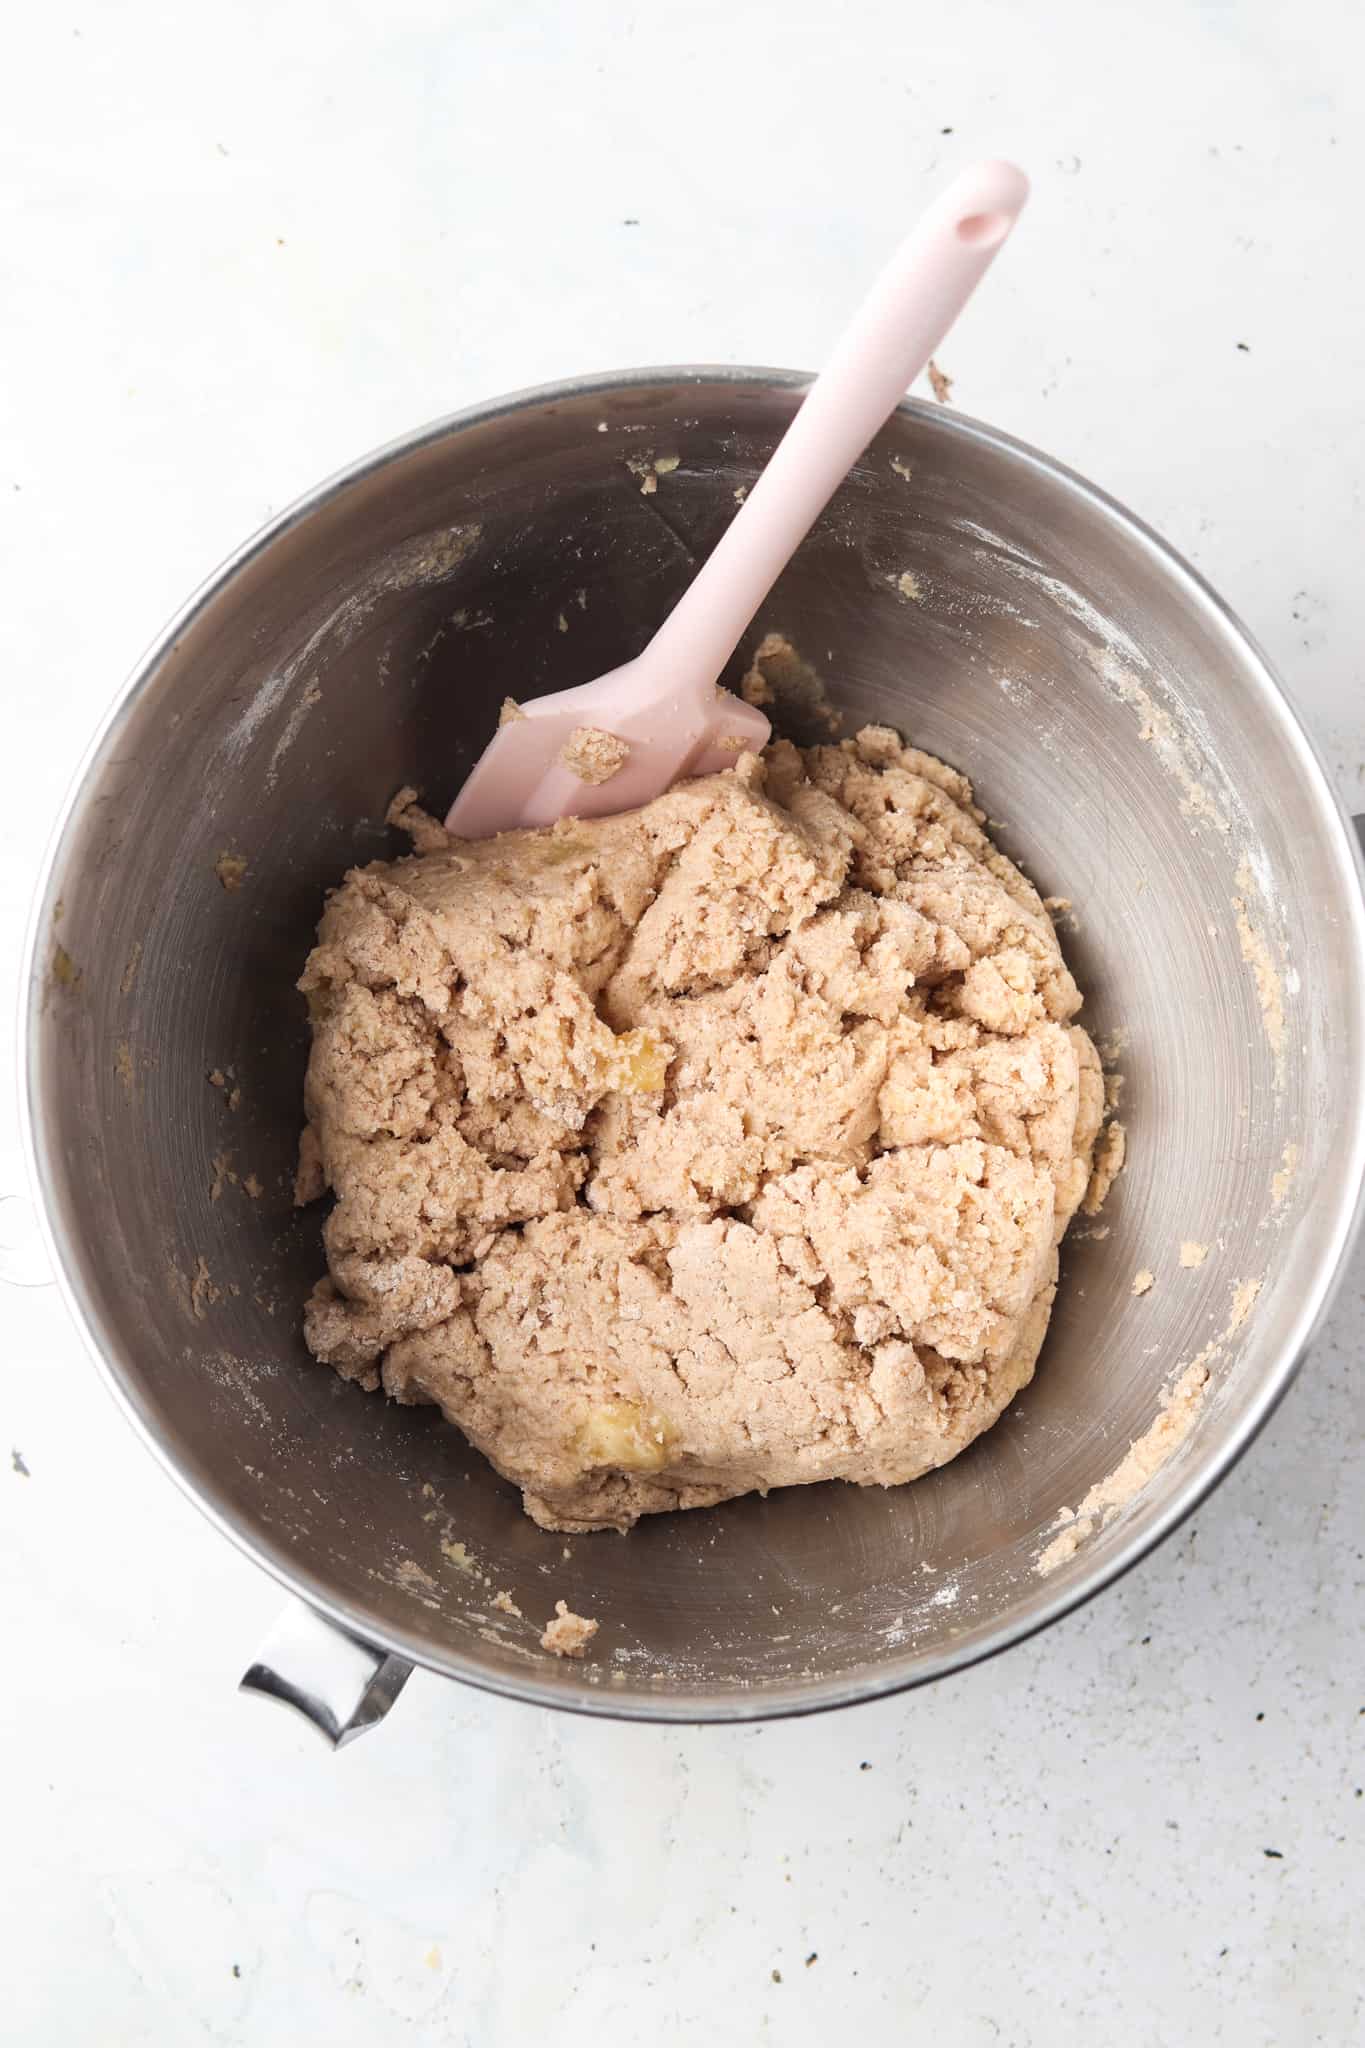 Bananas, cassava flour, arrowroot flour, coconut flour, applesauce, maple syrup, ground ginger, cinnamon, vanilla powder, baking soda, baking powder, and extra virgin olive oil in a silver mixing bowl with a pink spatula in it.